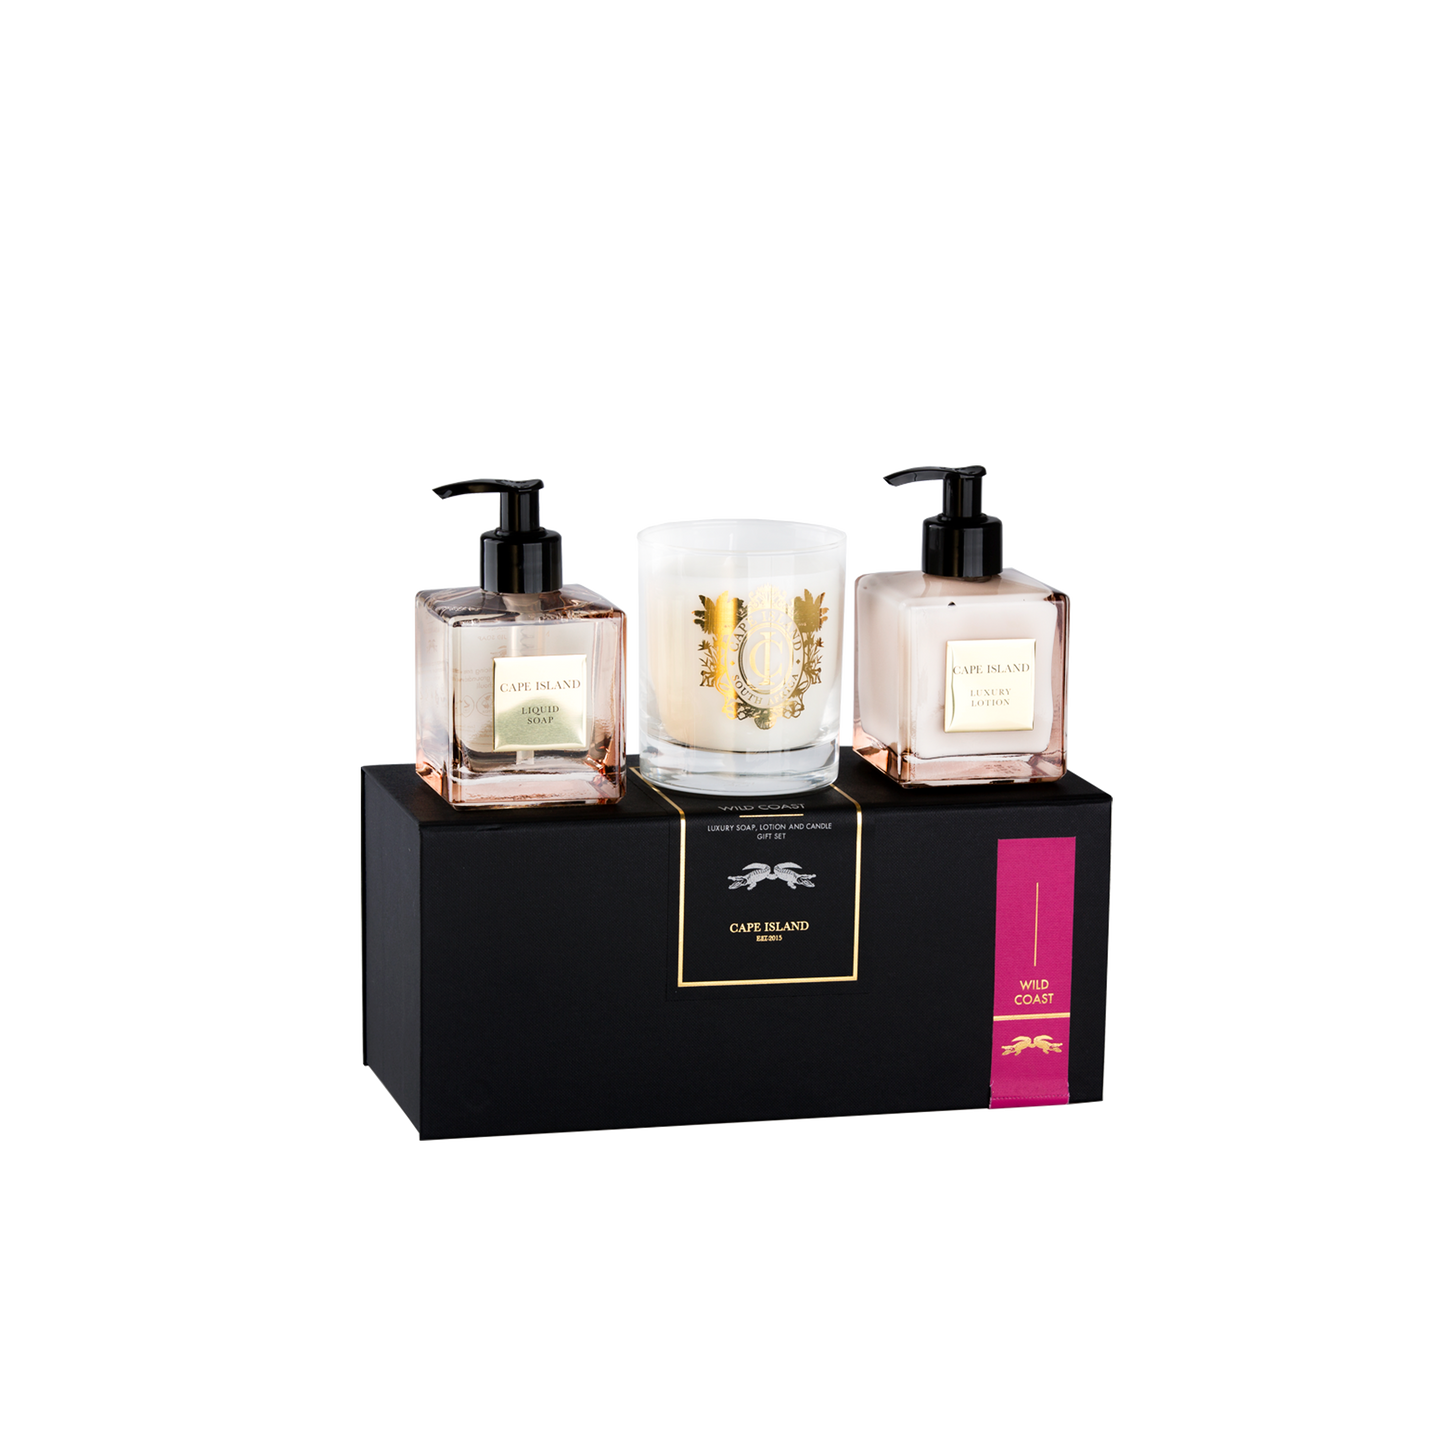 Wild Coast Luxury Liquid Soap, Lotion & Candle Collection